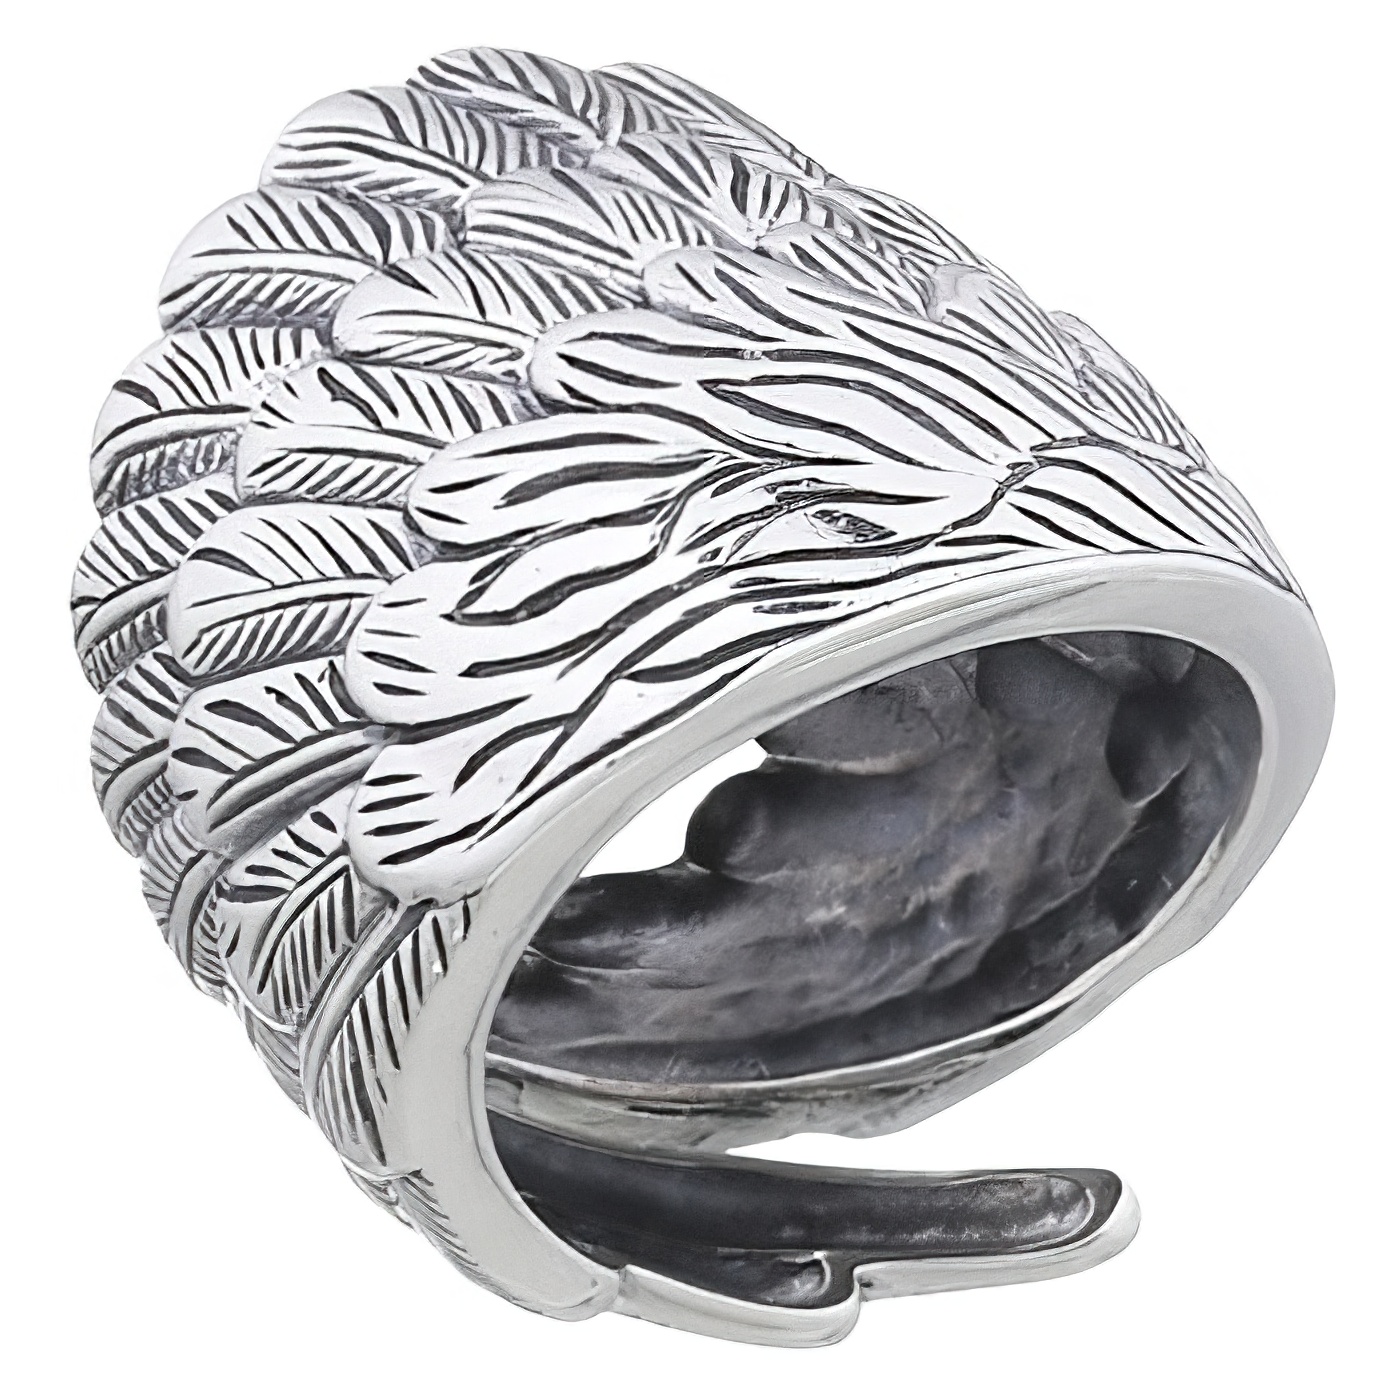 Twirled Feather Wing 925 Silver Adjustable Plain Ring by BeYindi 